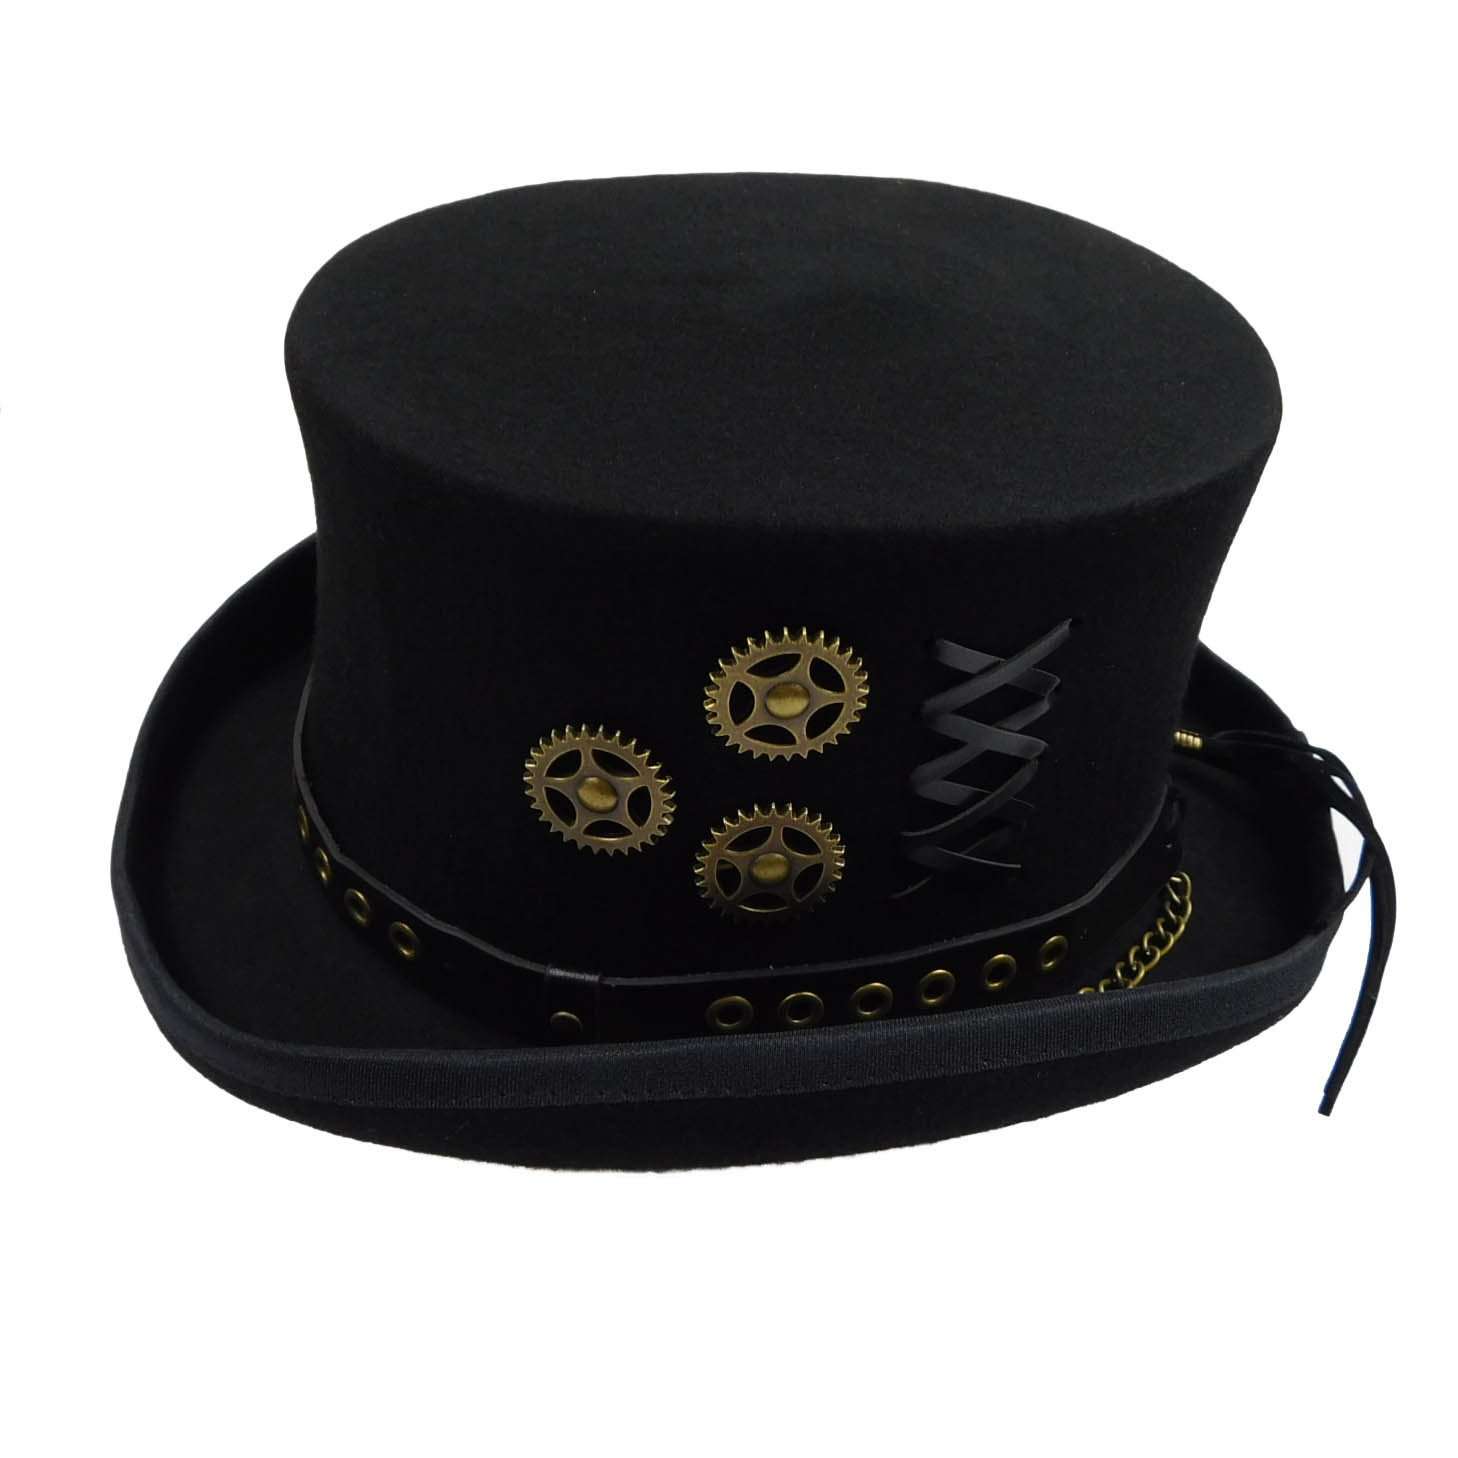 Steampunk Top Hat - K. Keith Top Hat Great hats by Karen Keith    